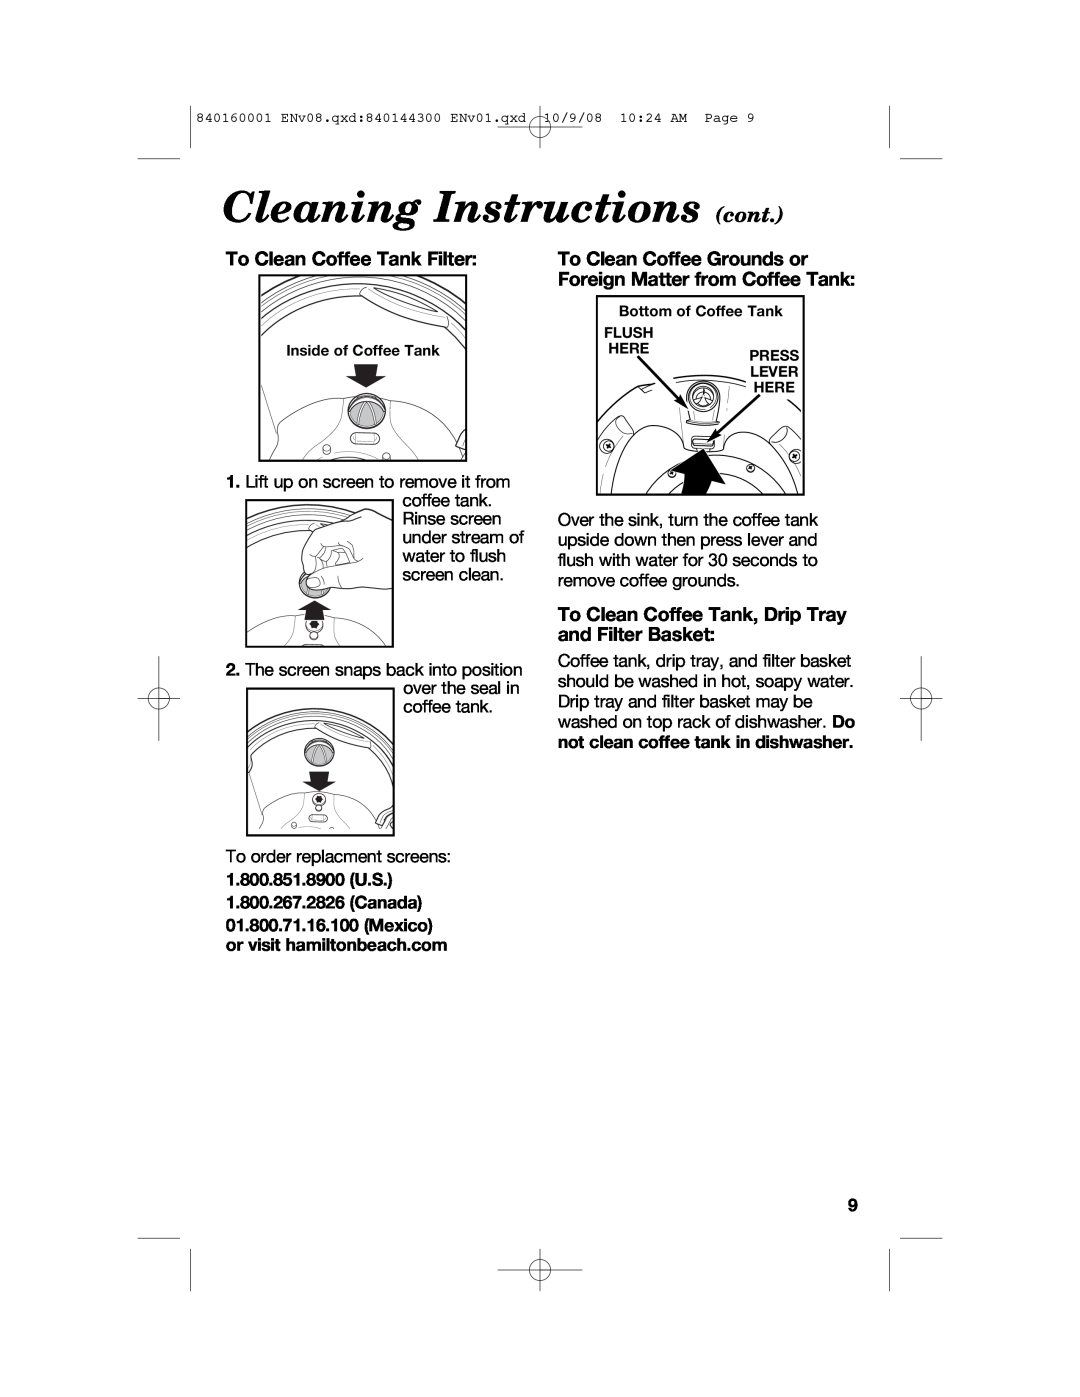 Hamilton Beach 47214 Cleaning Instructions cont, To Clean Coffee Tank Filter, 1.800.851.8900 U.S. 1.800.267.2826 Canada 